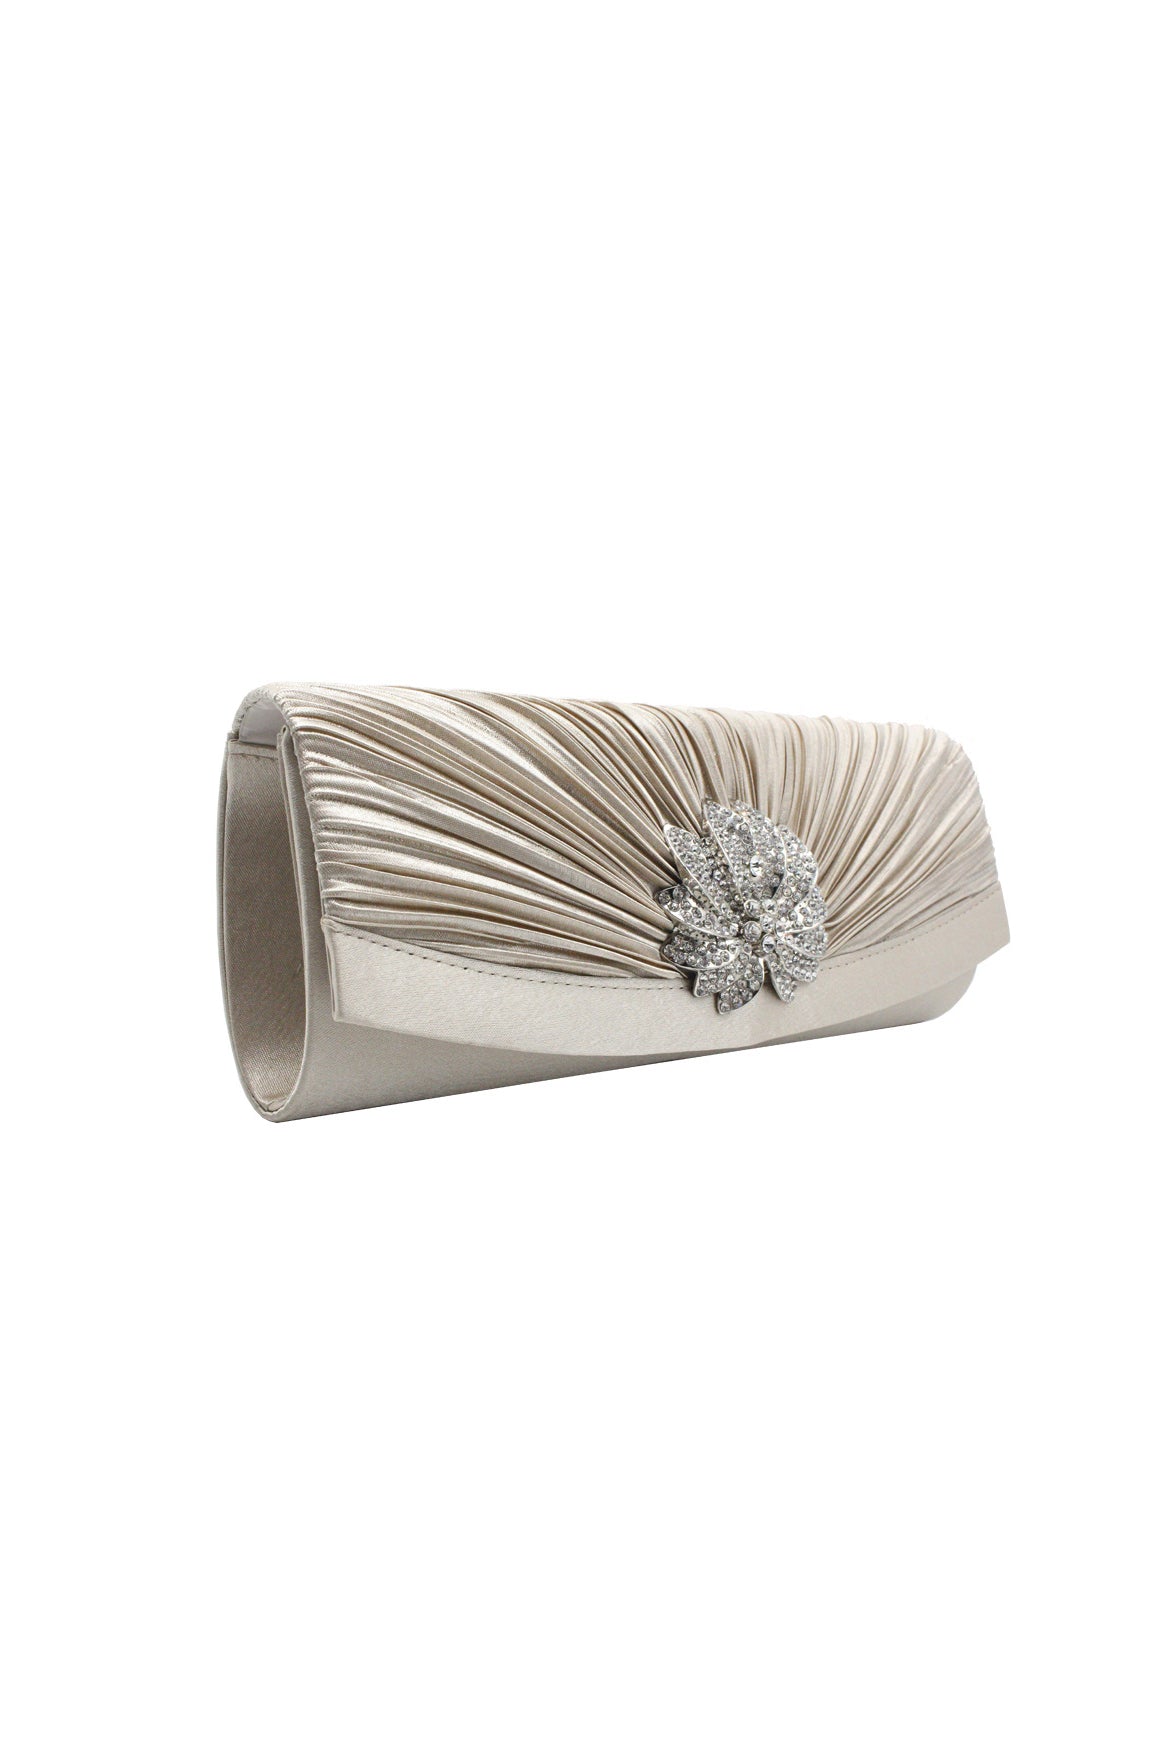 Rereny Pleated Diamante Buckle Clutch